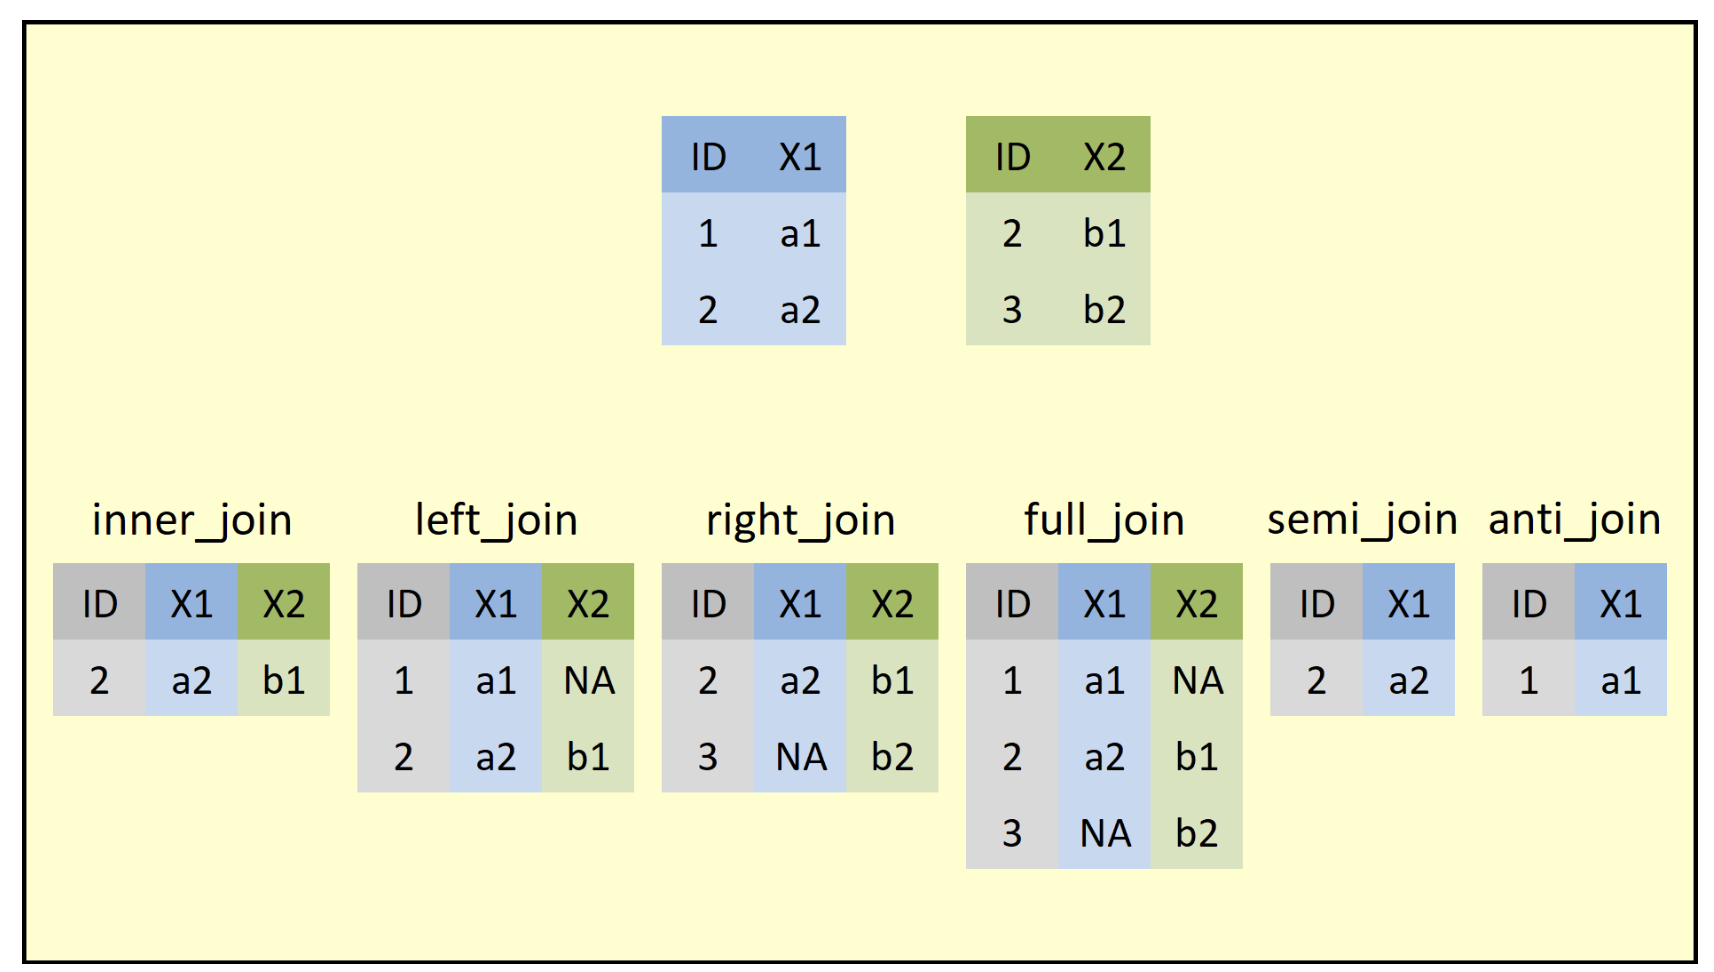 If you ever need to understand which join is the right join for you, try to find an image that will lay out what the function is doing. I found this one that is quite good and is taken from Statistics Globe blog: https://statisticsglobe.com/r-dplyr-join-inner-left-right-full-semi-anti